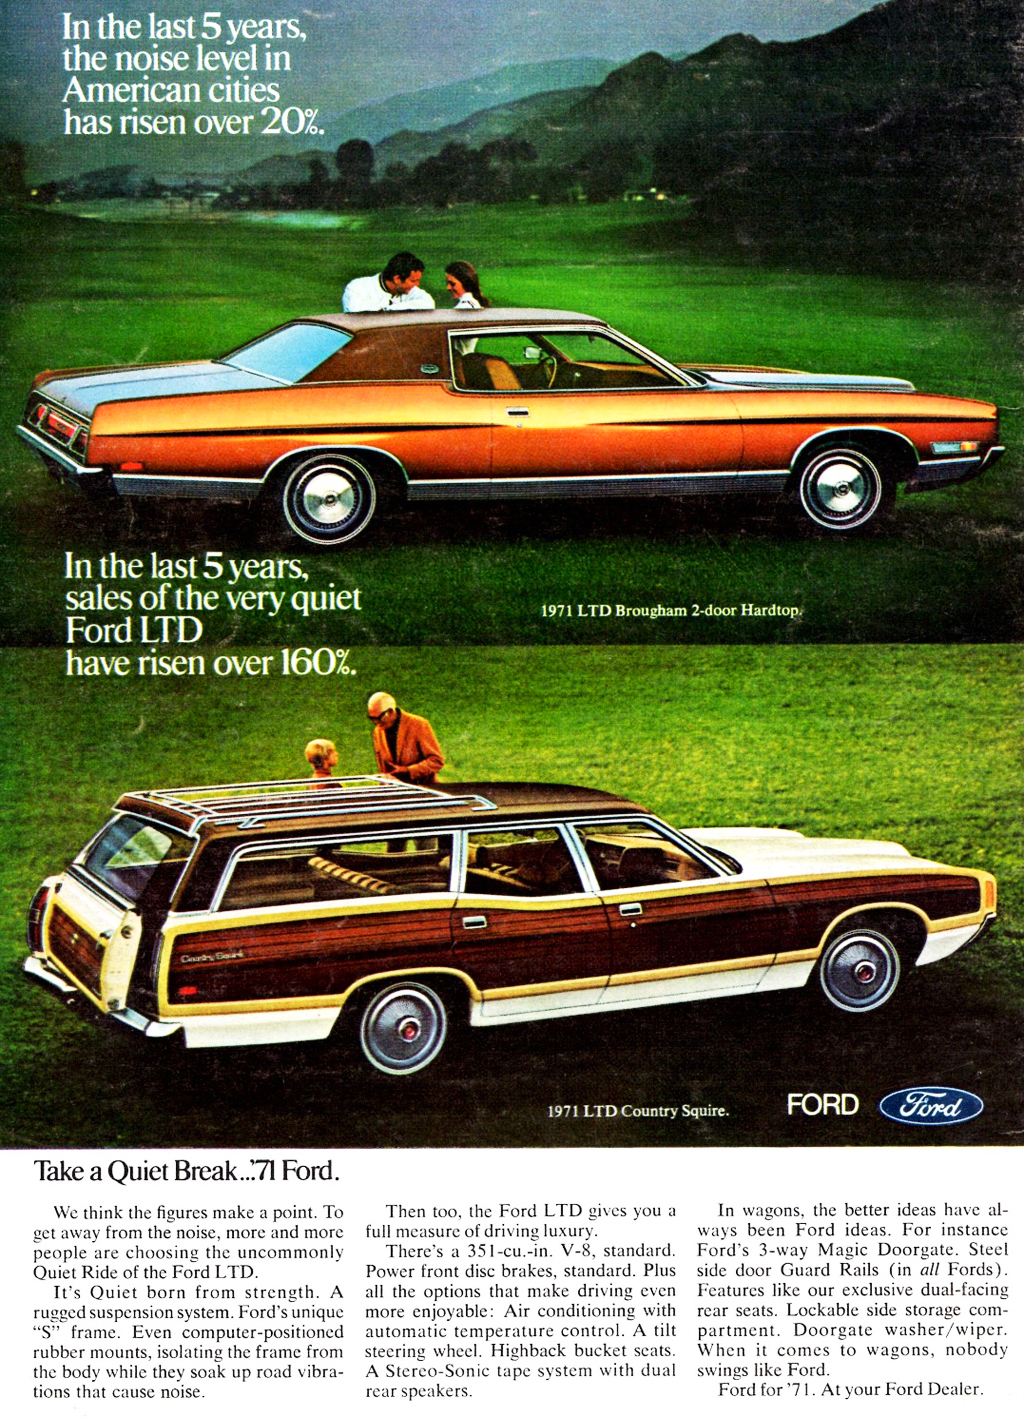 1971 Ford LTD Hardtop Country Squire